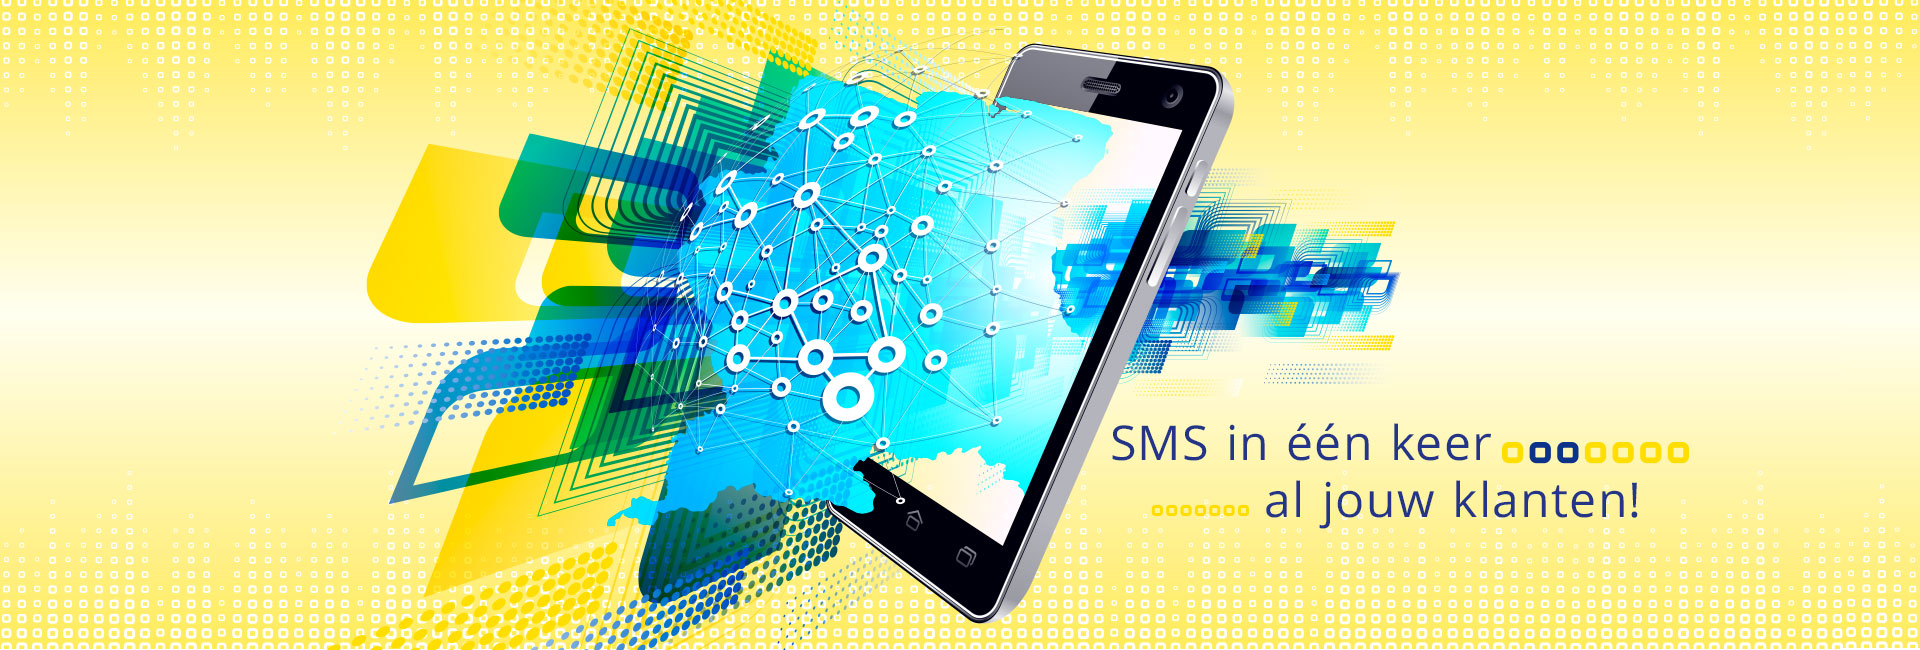 sms-content-service